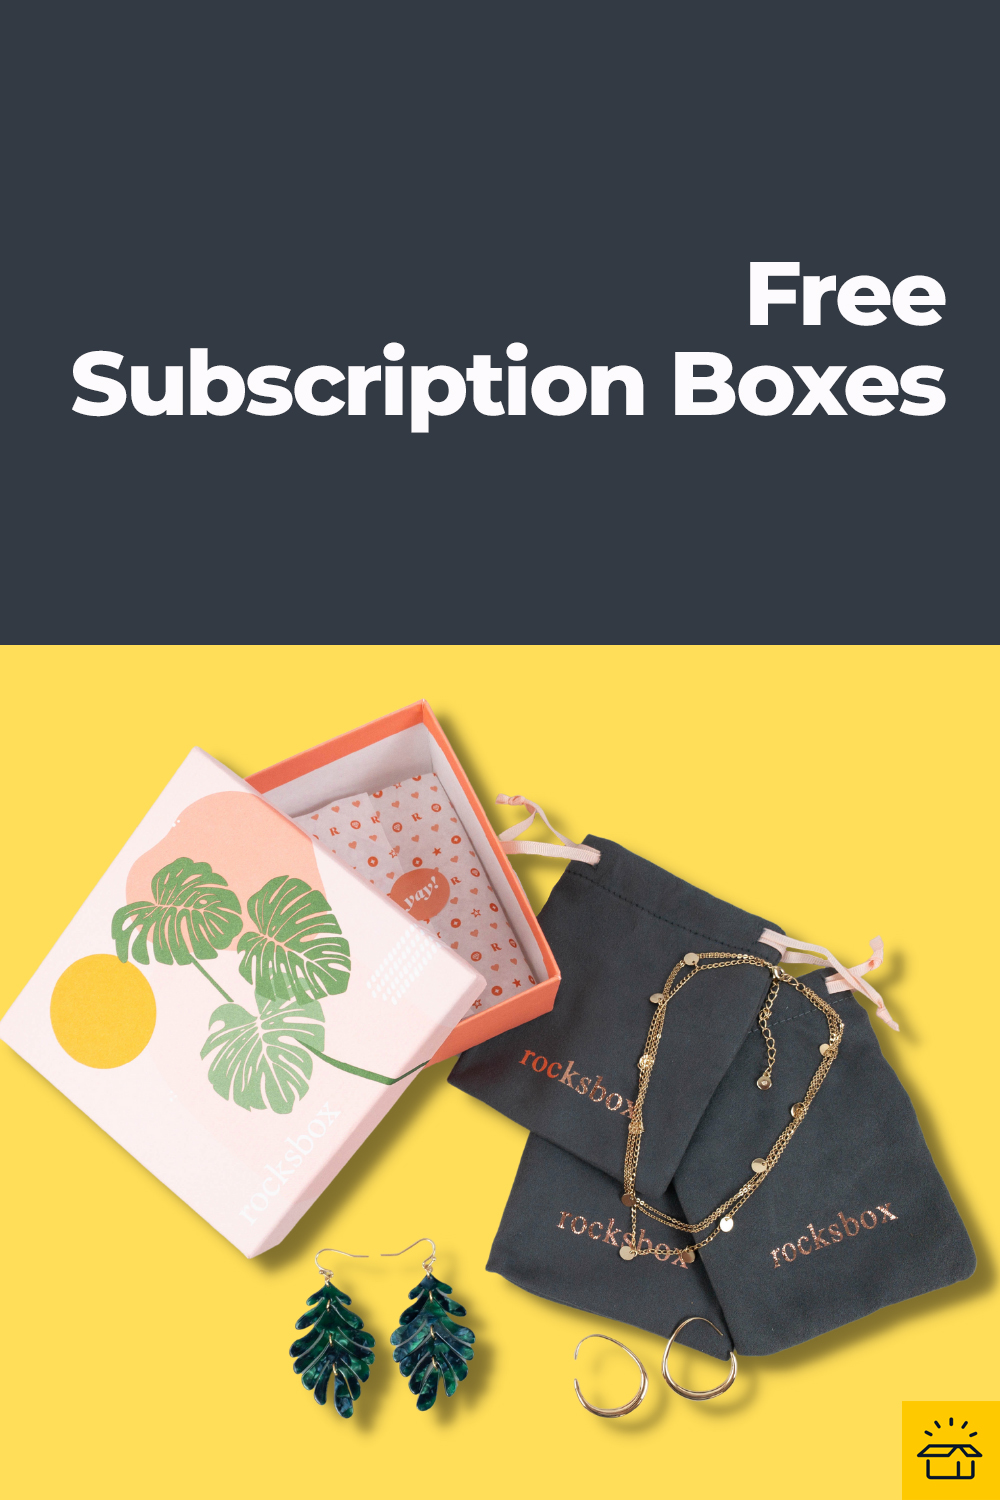 Free sample subscription boxes